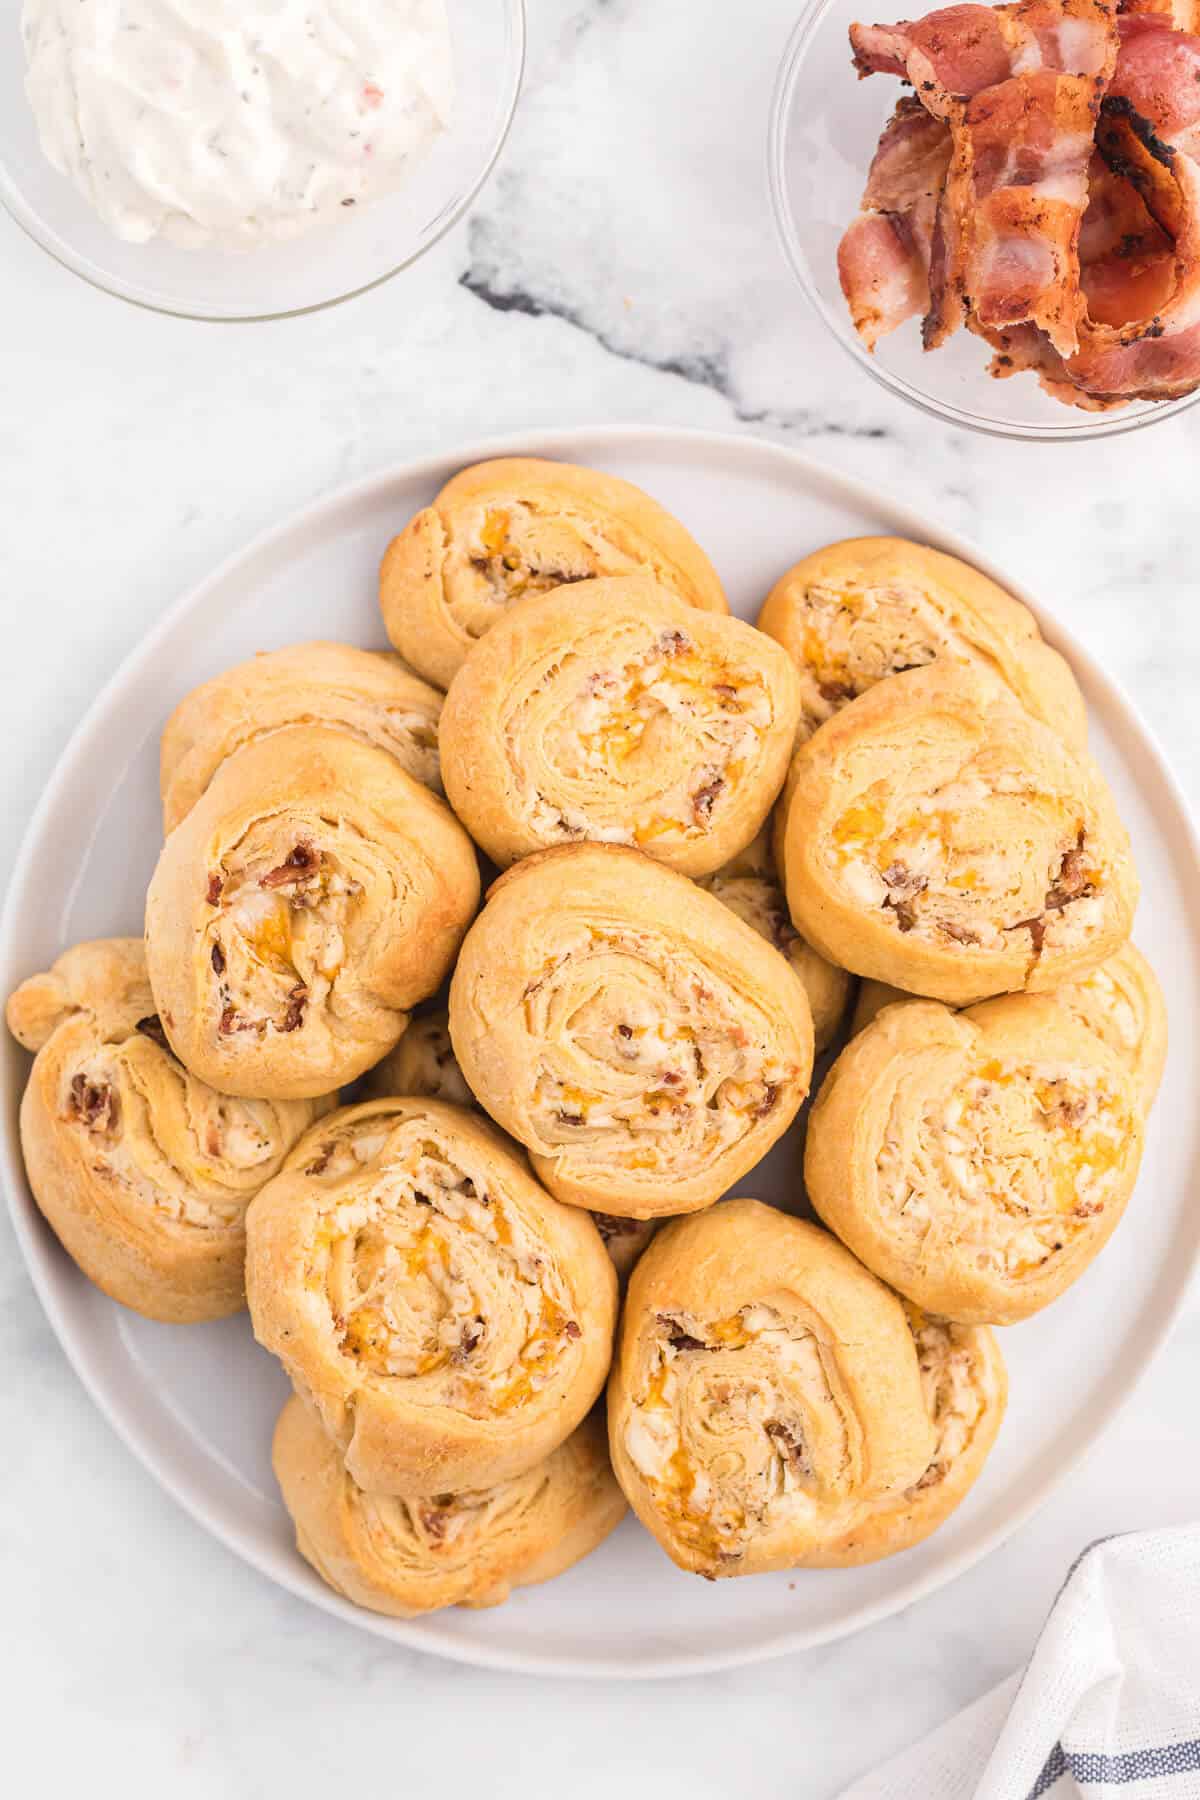 Cheesy Bacon Pinwheels - A dreamy holiday appetizer! Fluffy crescent rolls stuffed with bacon, onion, and two cheeses for a snack that's enough for a meal.